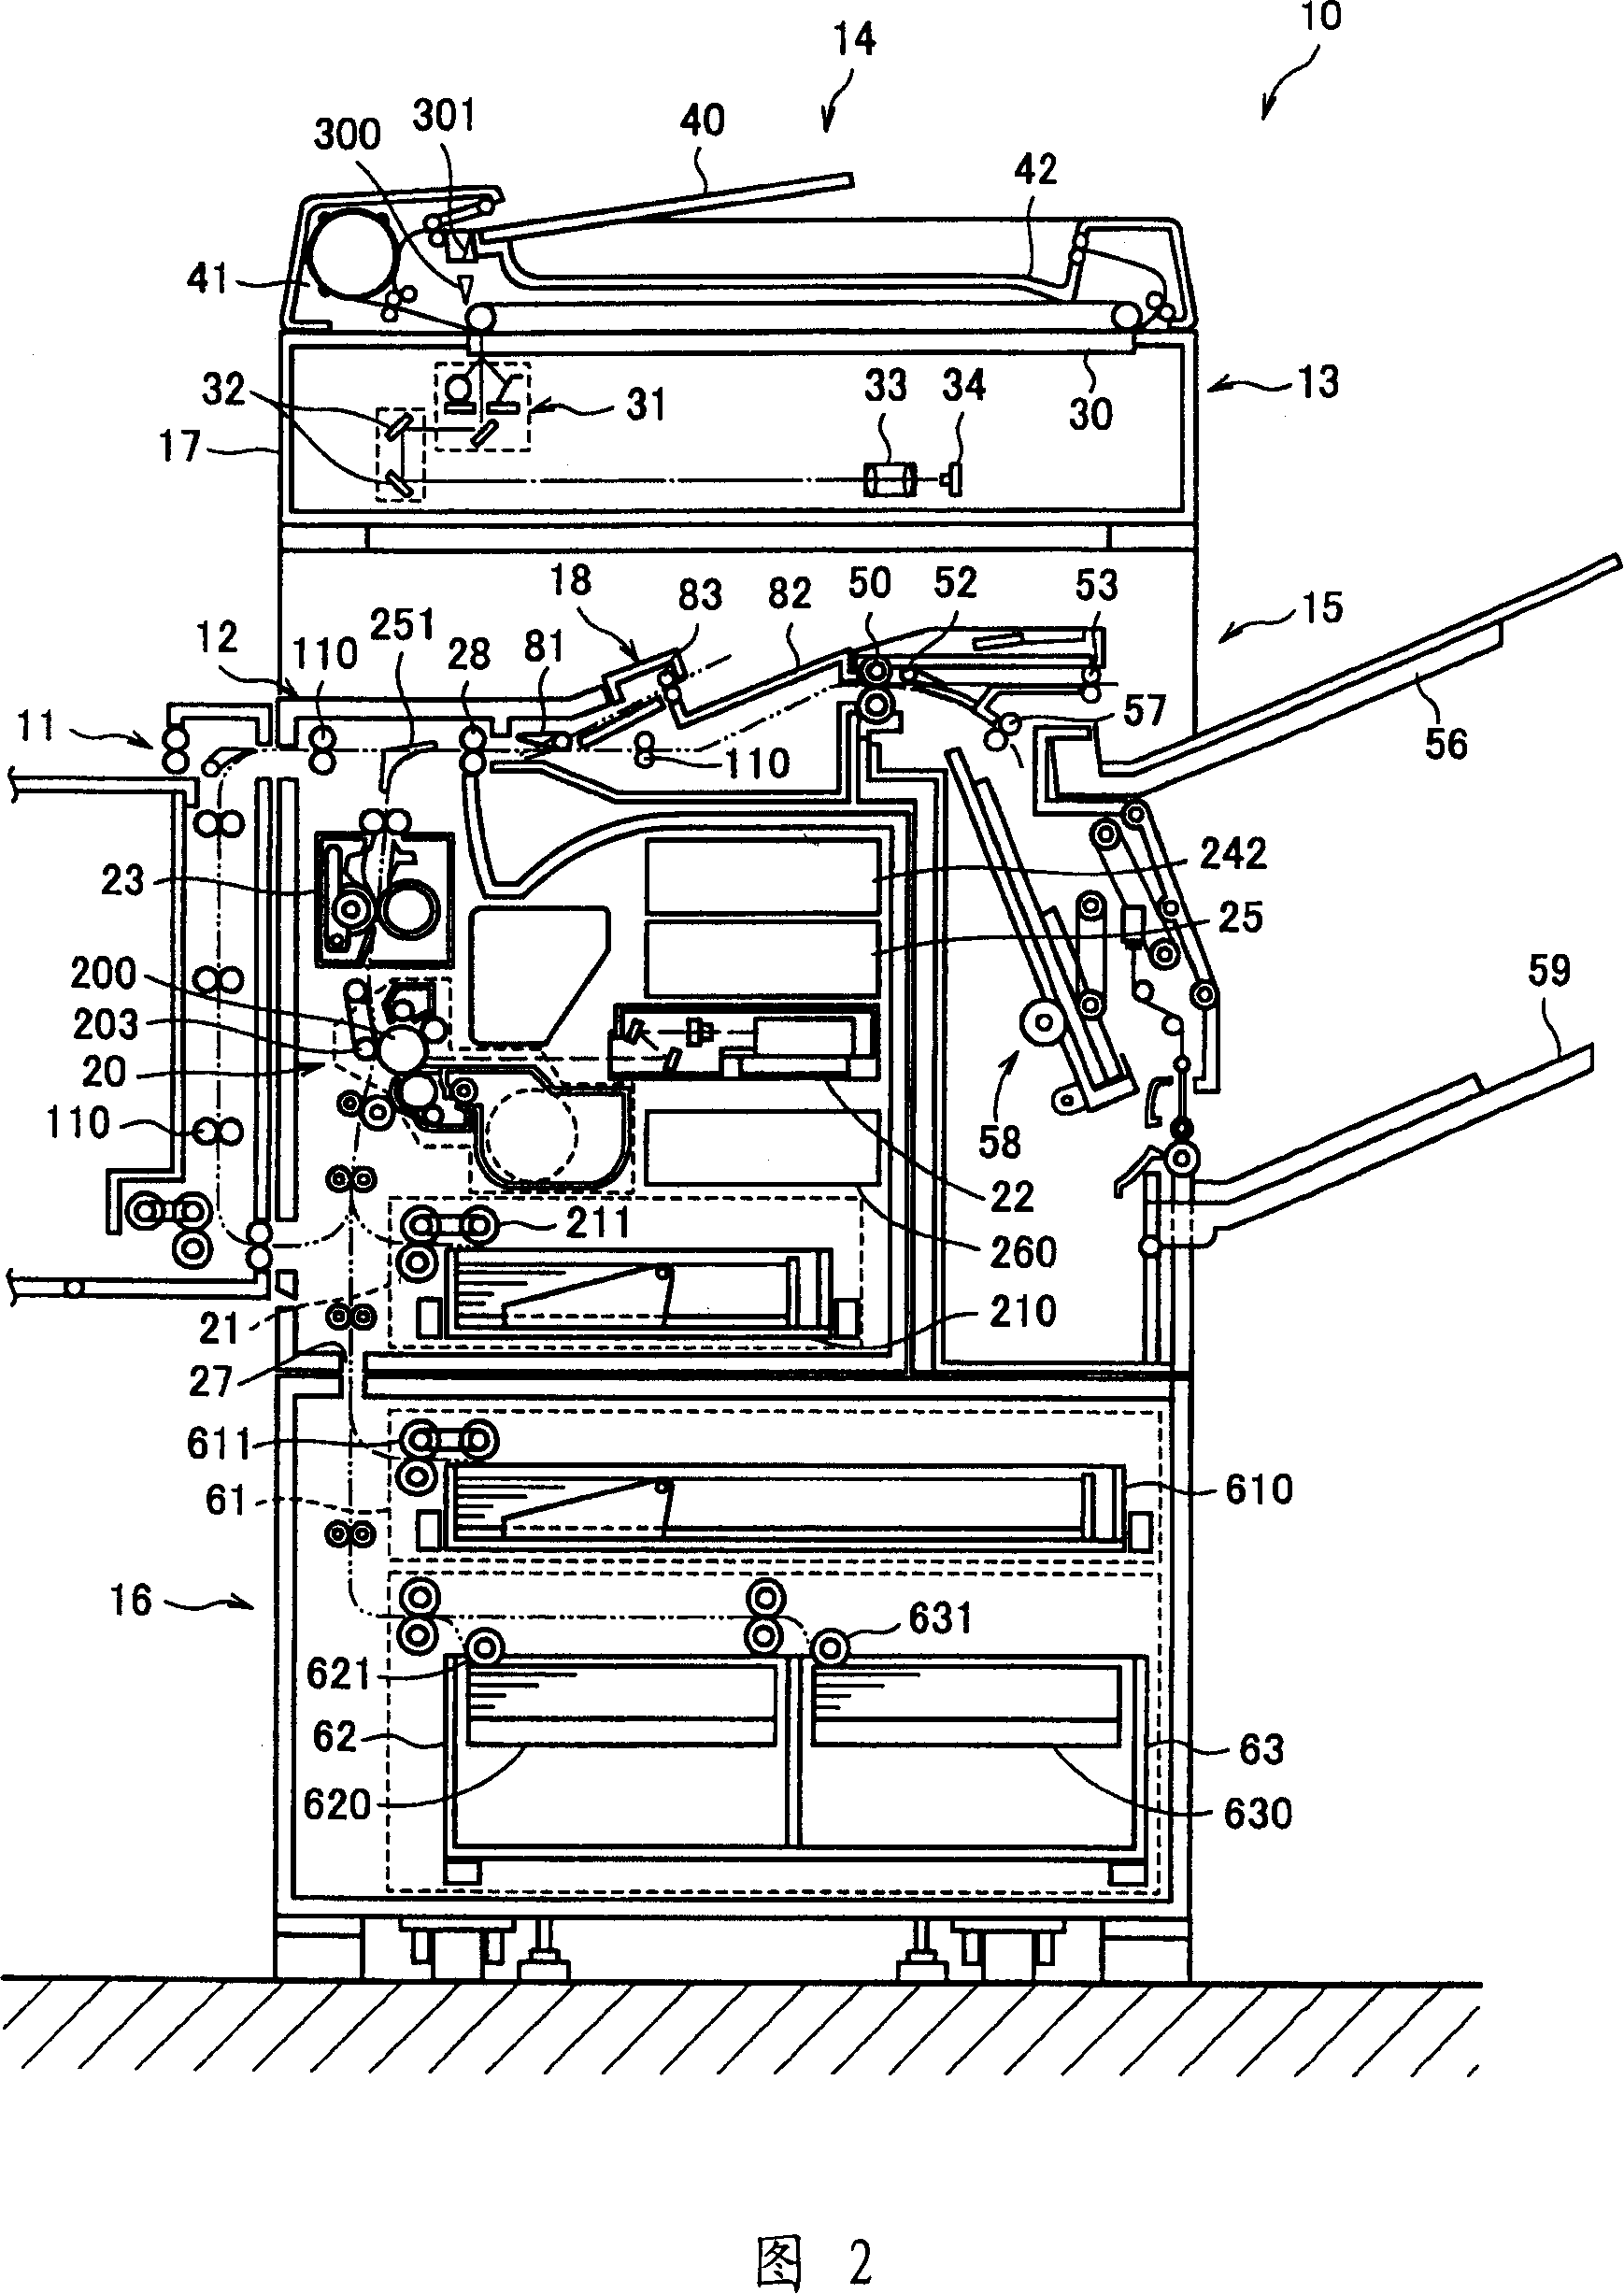 Image forming apparatus, image forming process and image forming program